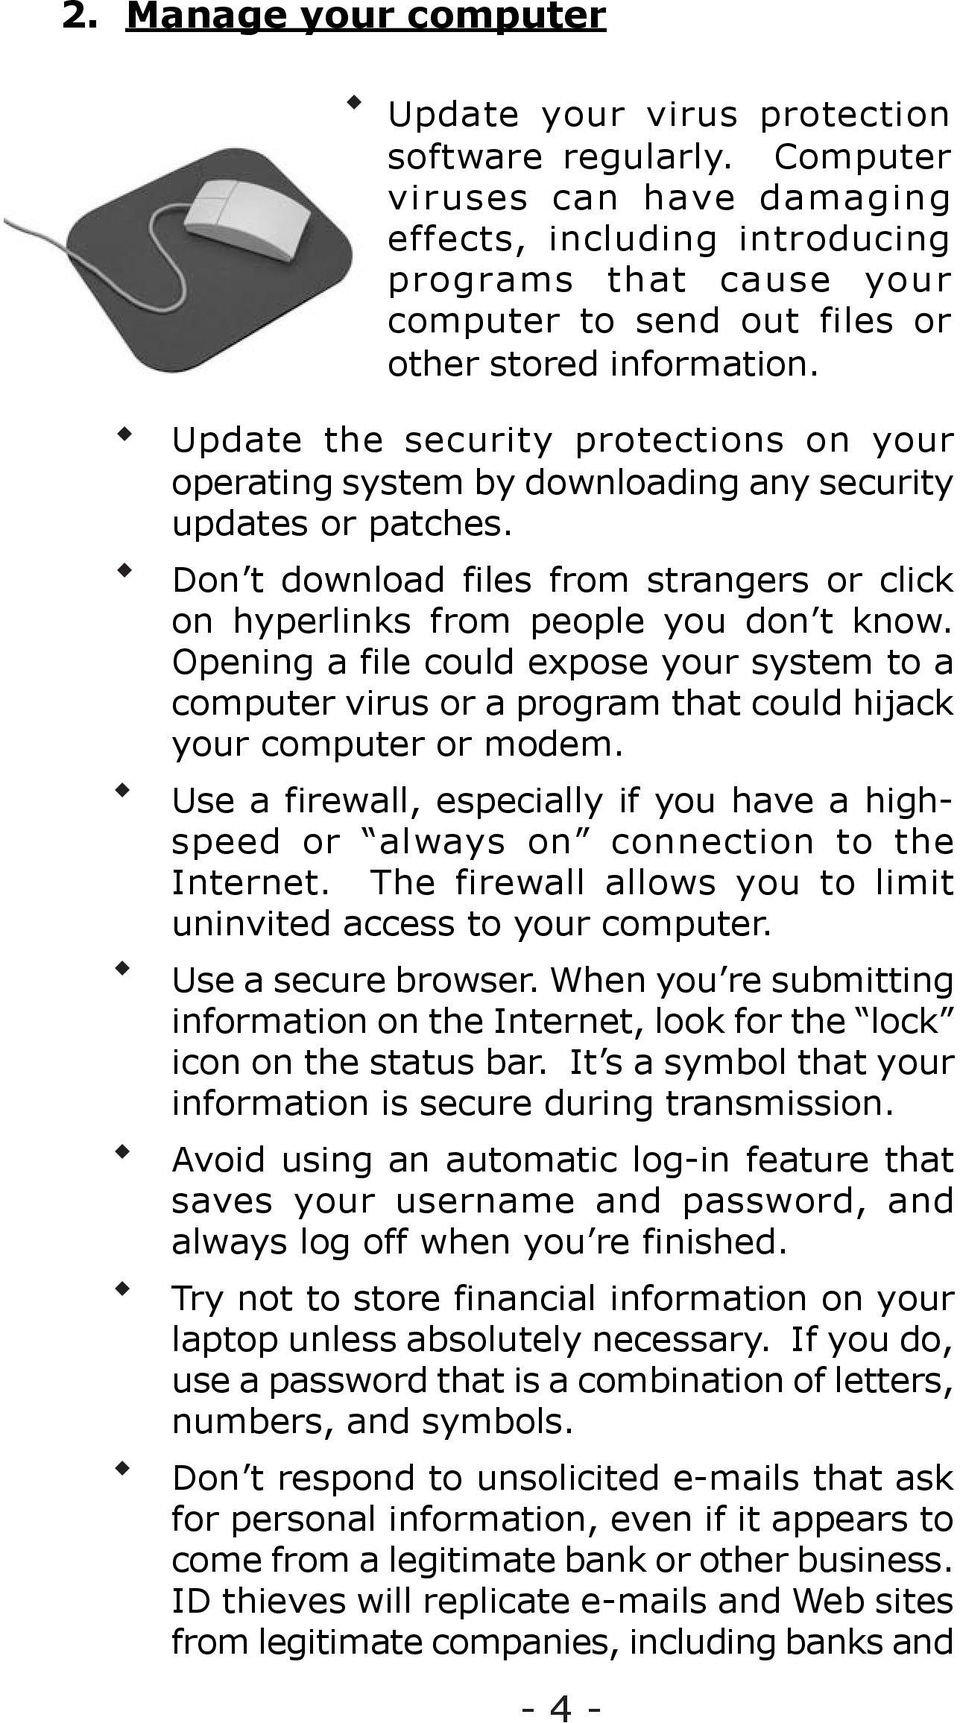 Update the security protections on your operating system by downloading any security updates or patches. Don t download files from strangers or click on hyperlinks from people you don t know.